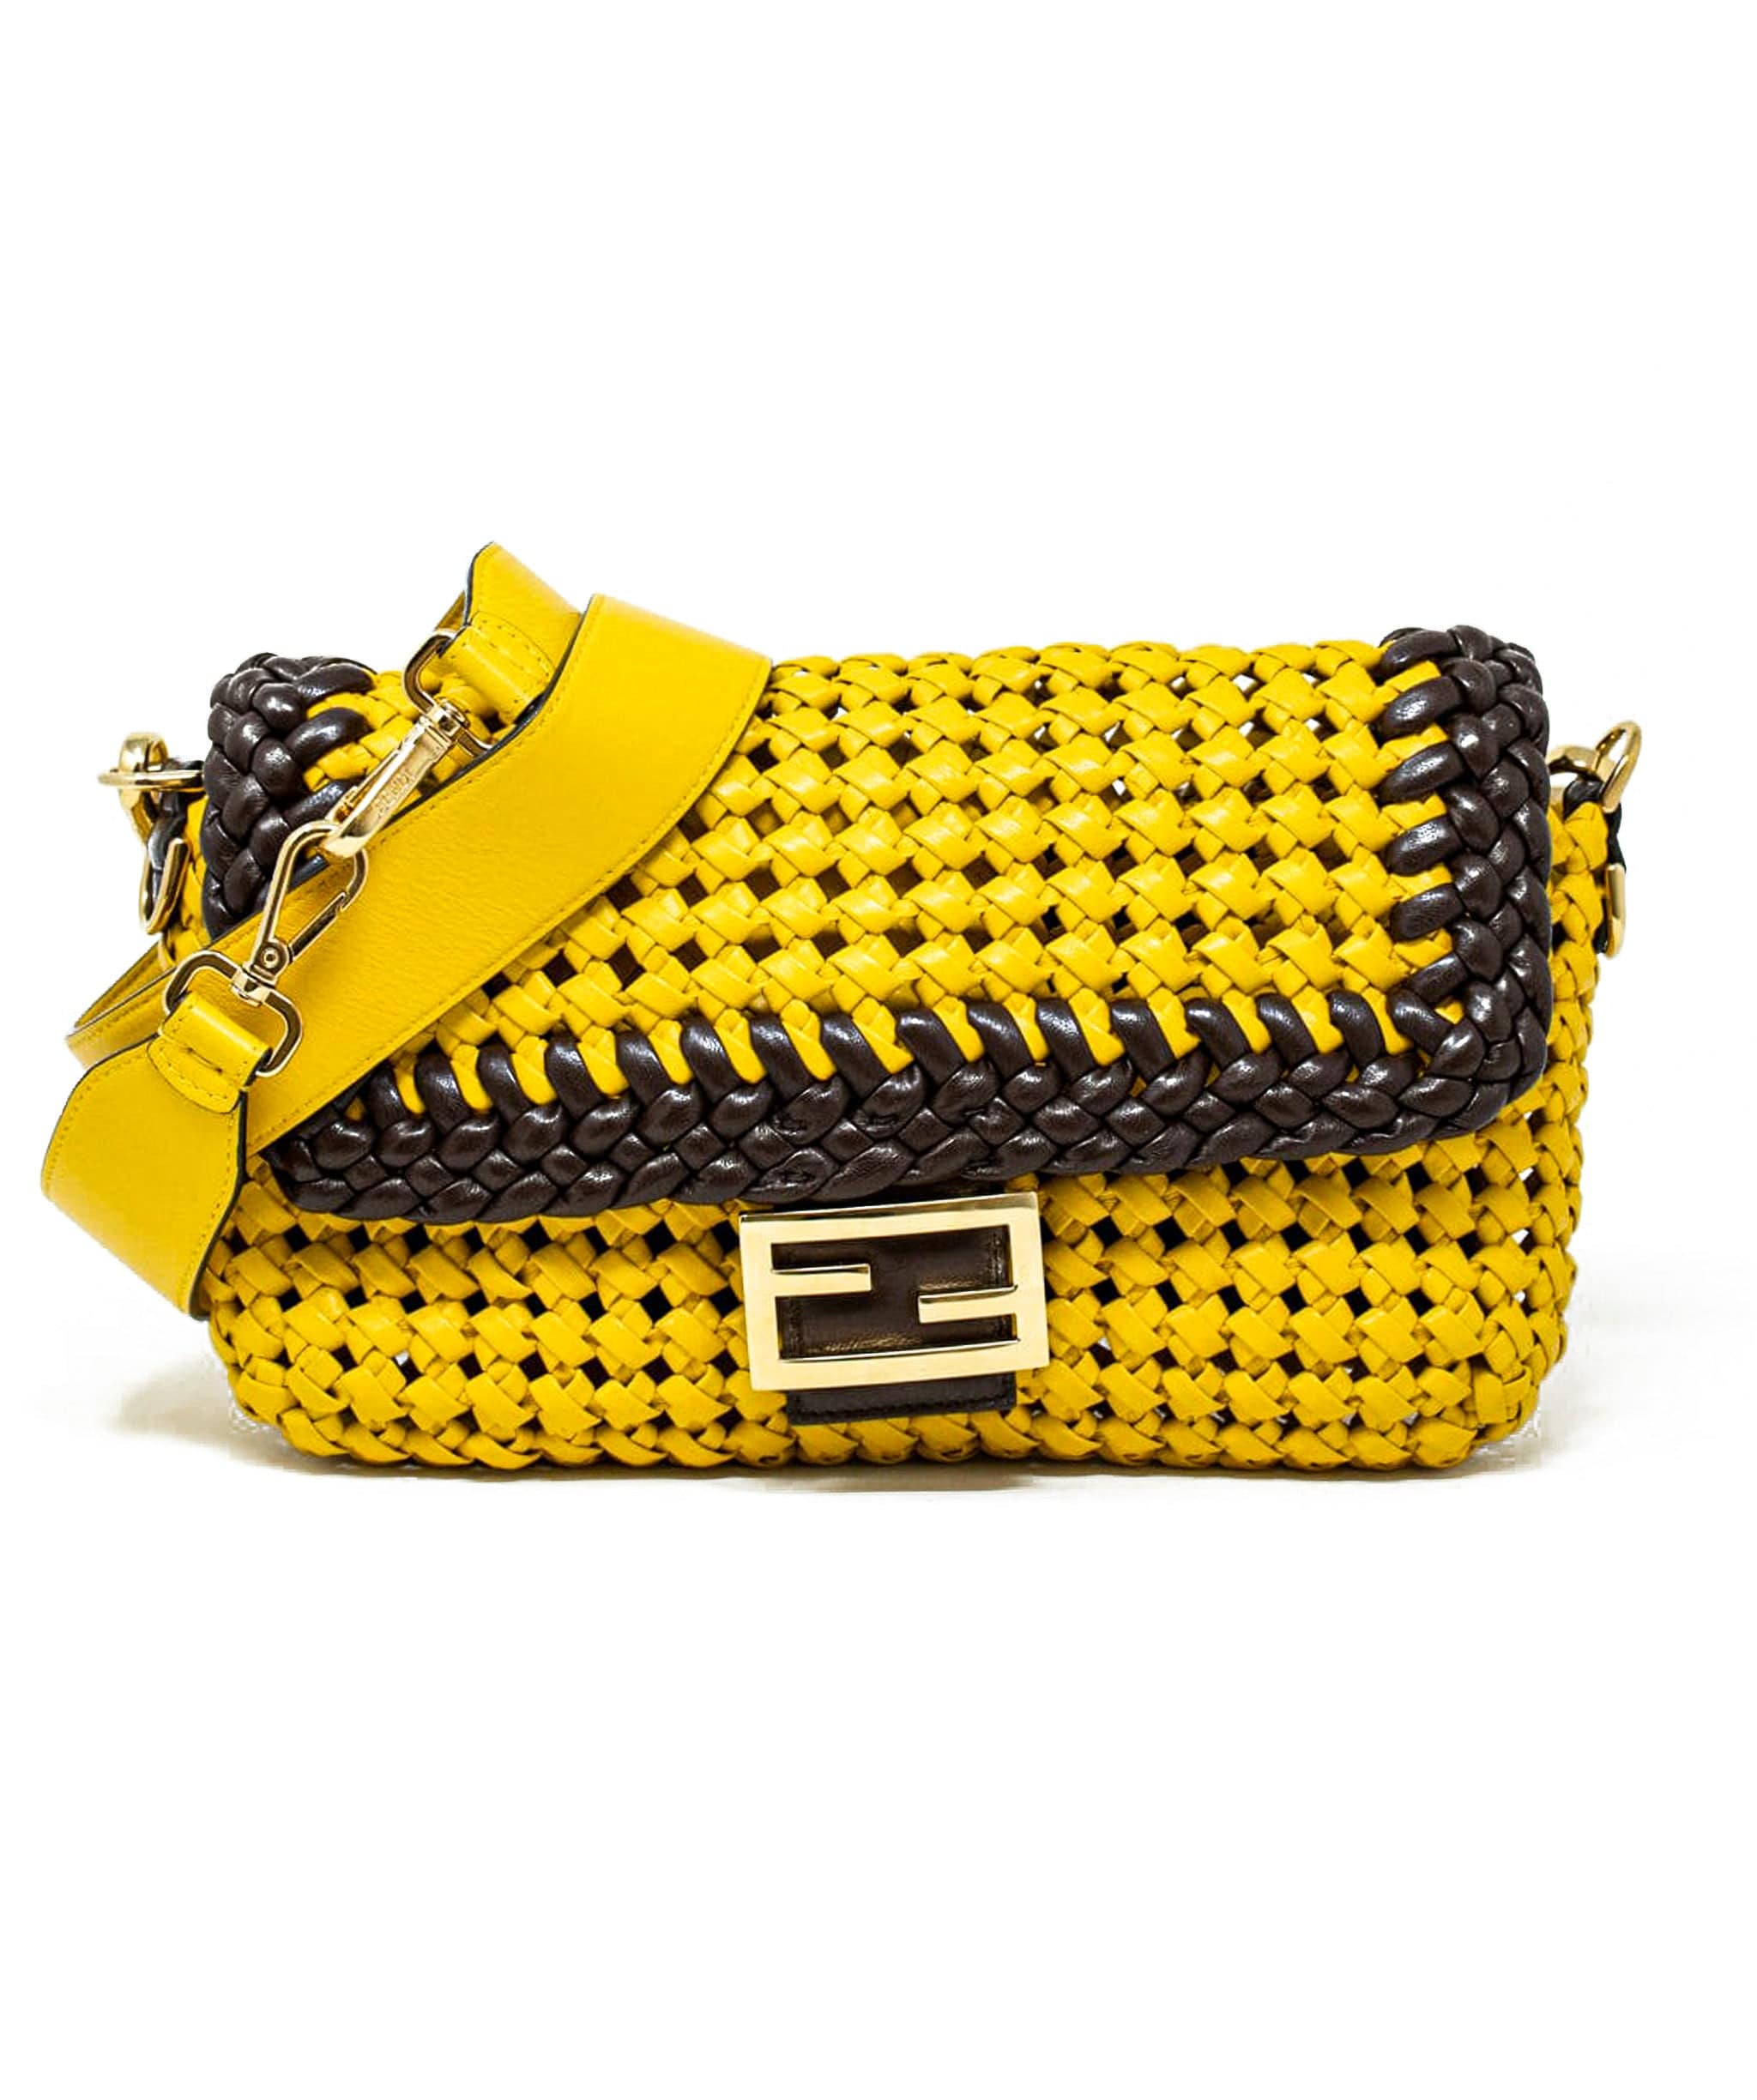 Fendi Fendi Yellow and Brown Woven Leather Baguette Bag - AGL1583